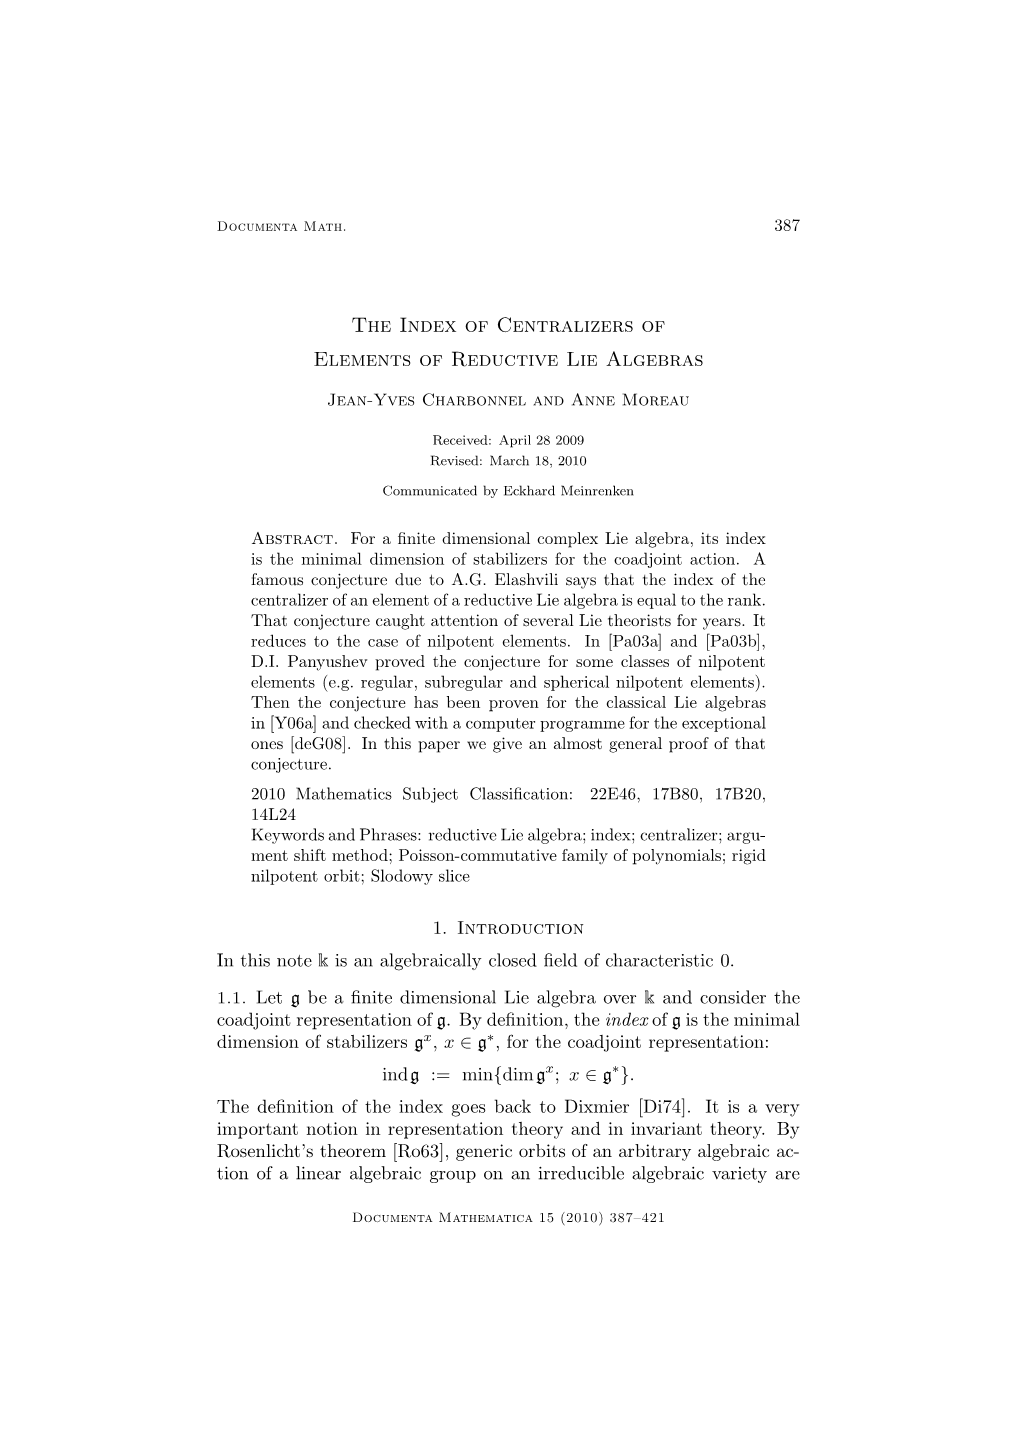 The Index of Centralizers of Elements of Reductive Lie Algebras